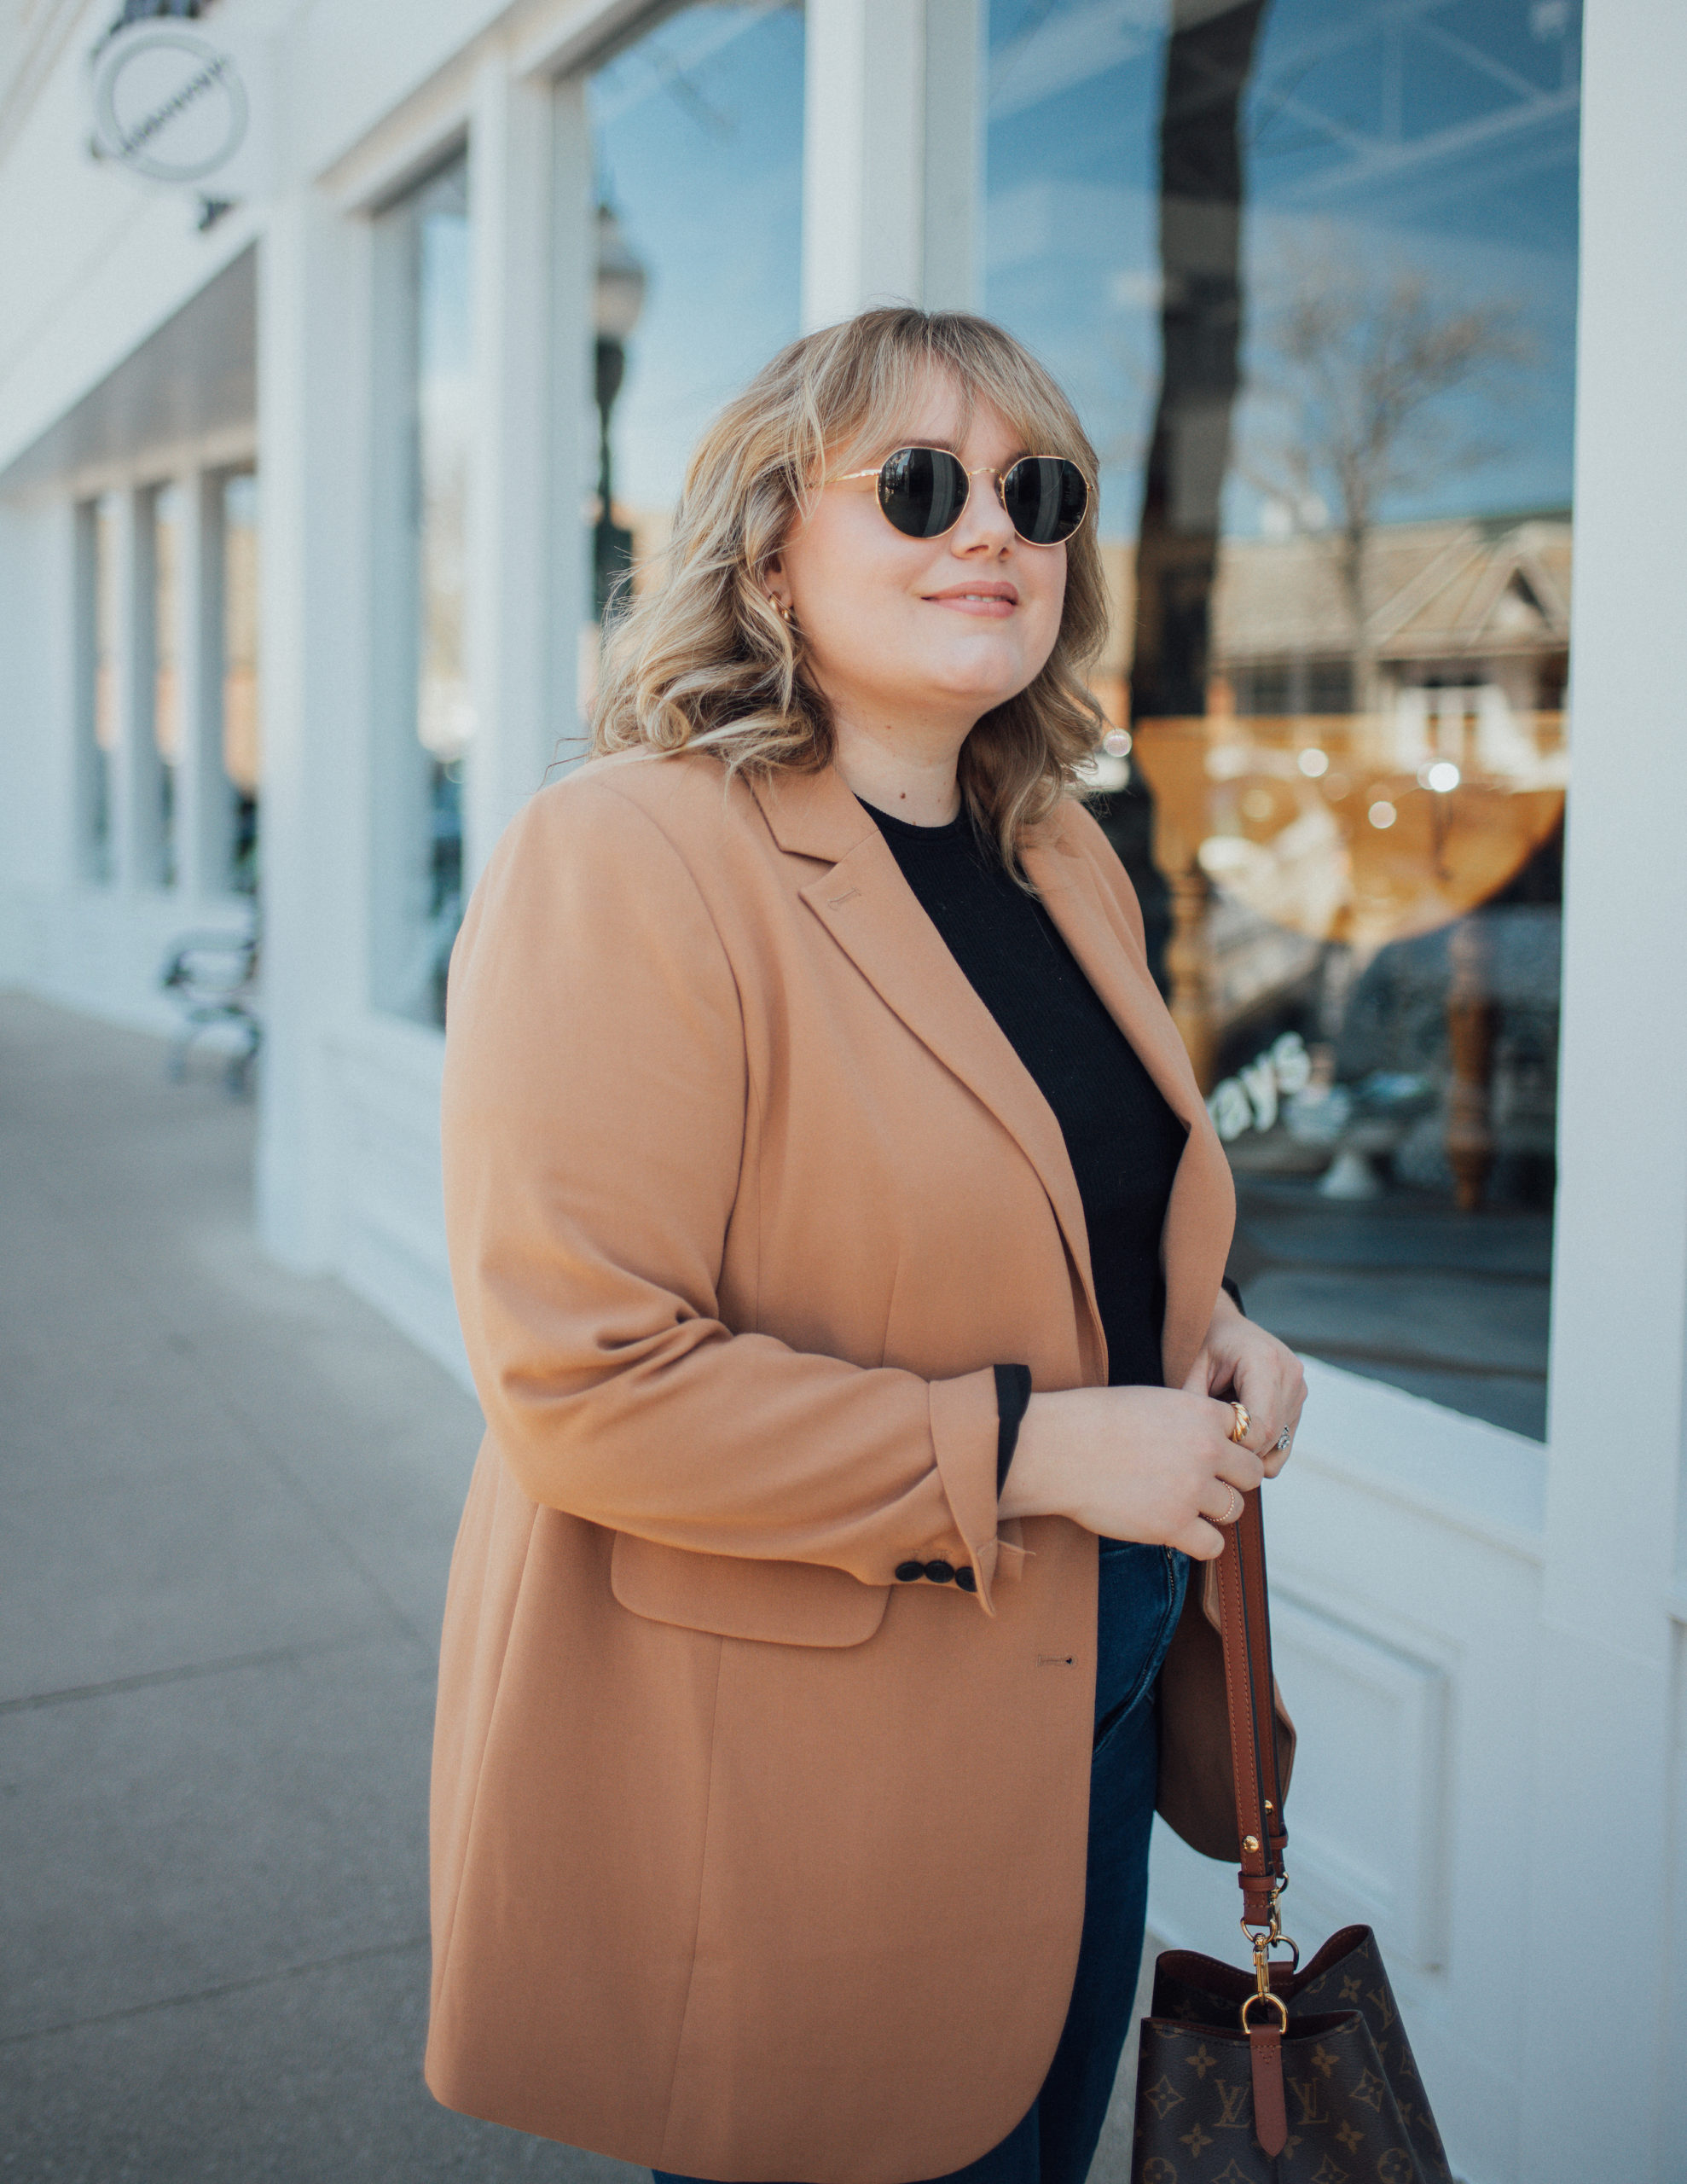 Sharing a chic blazer outfit idea for spring and plus size professional dressing! A blazer adds polish to any outfit from Eloquii! 